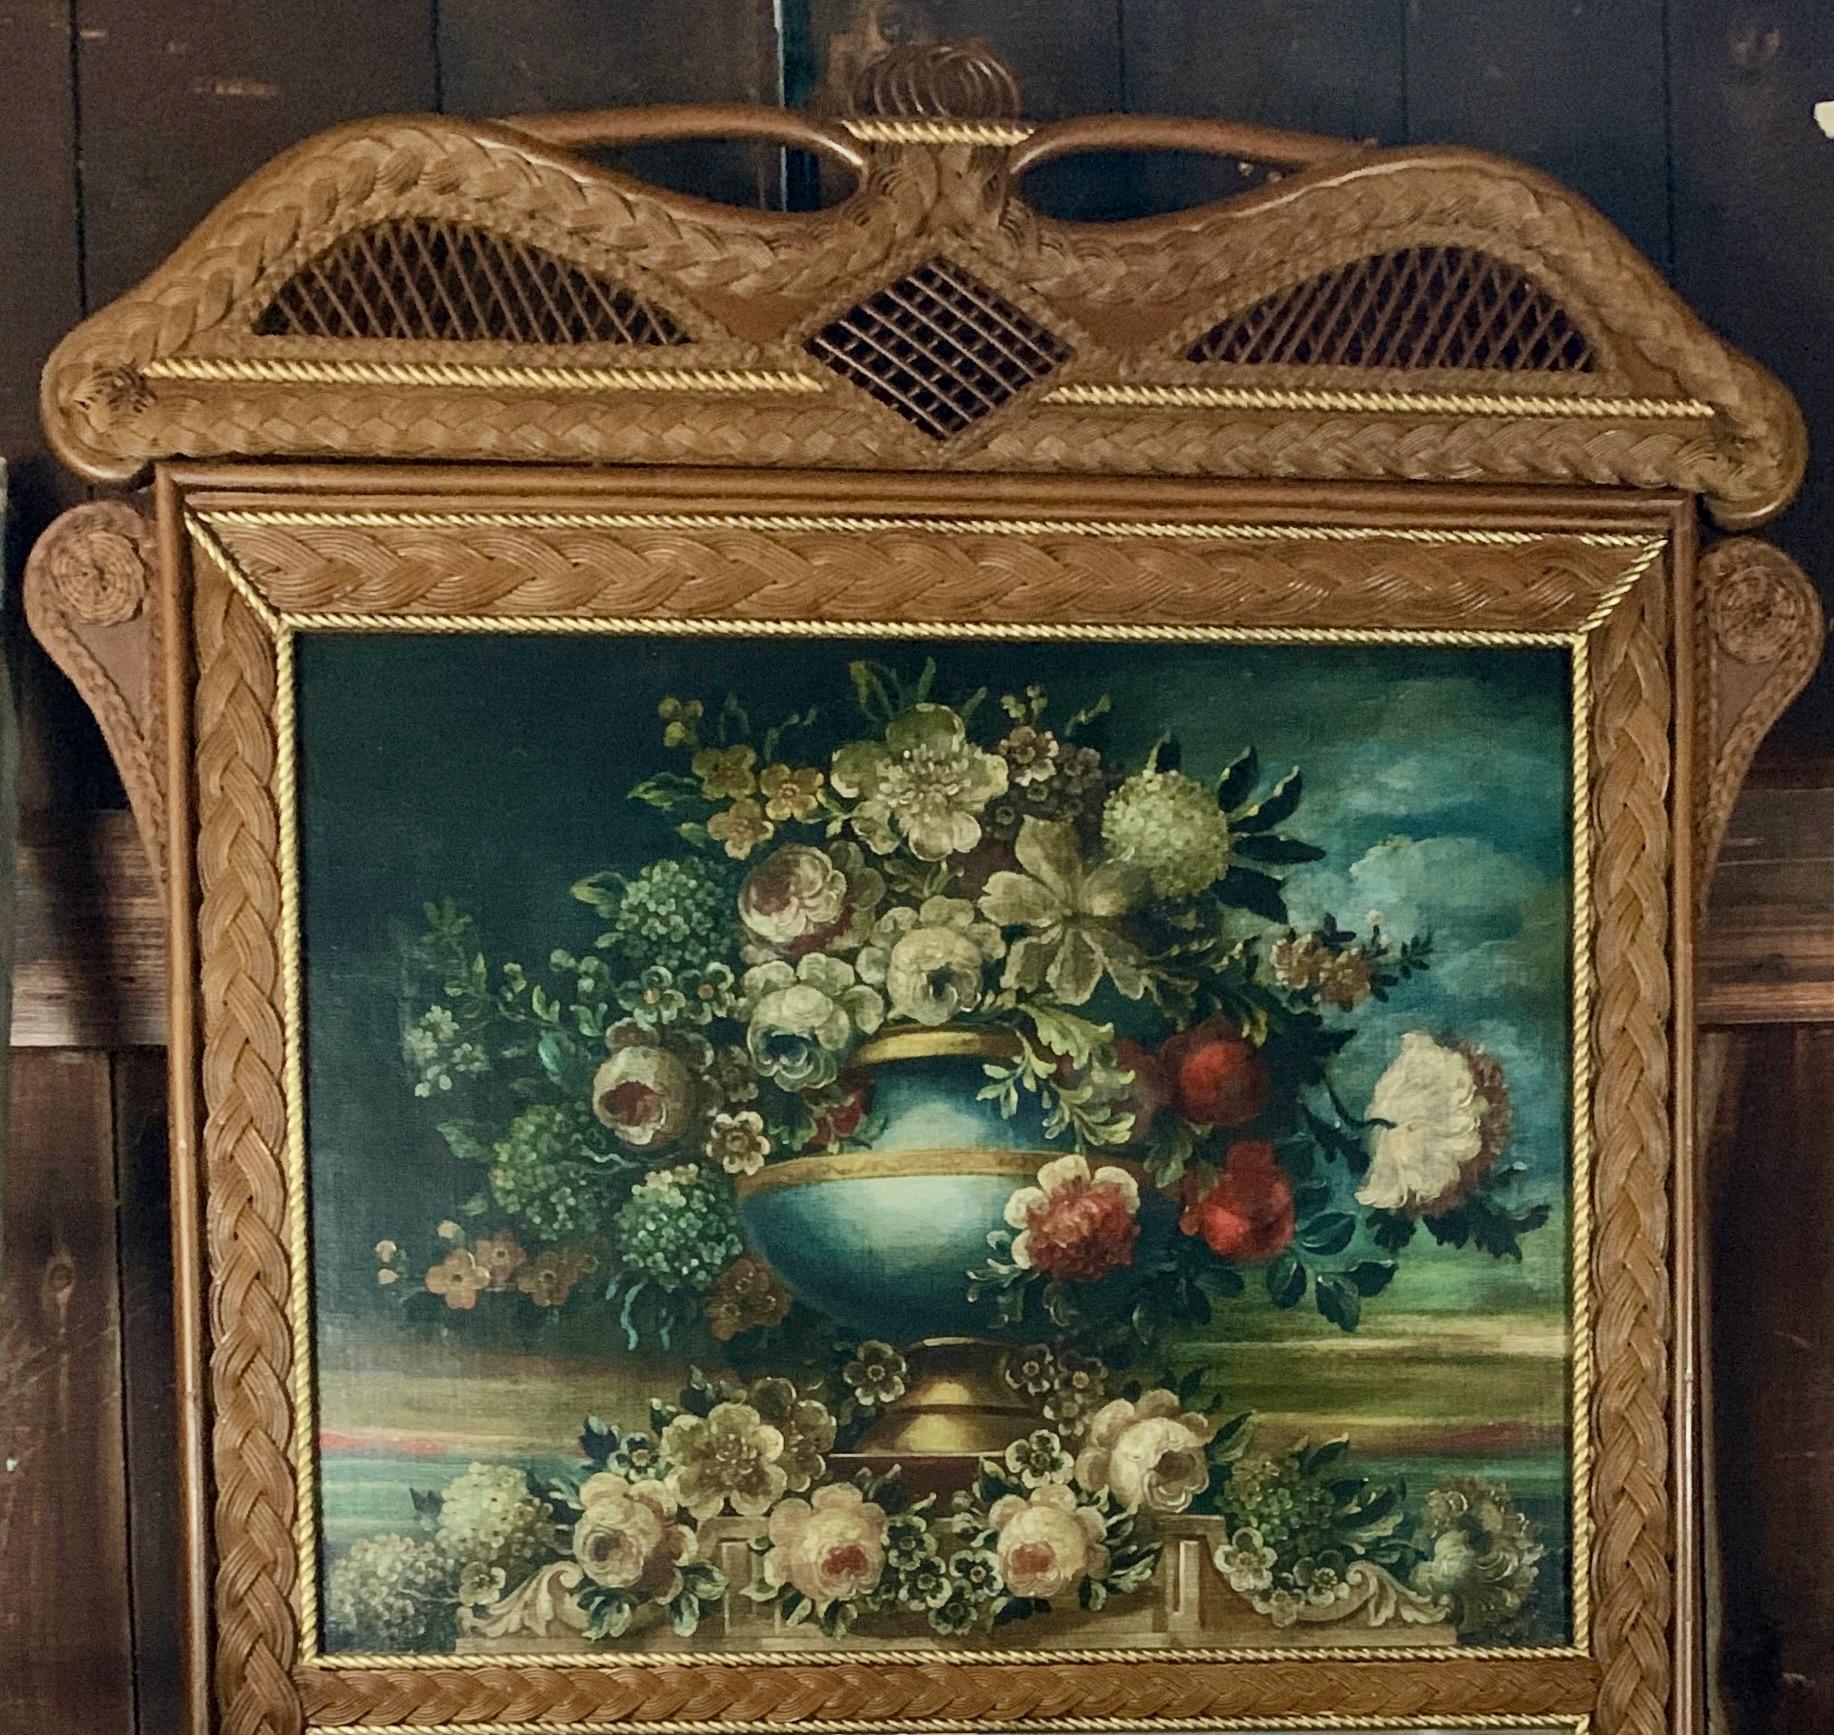 Painted A  Rare Wicker Framed Trumeau Mirror with Oil on Canvas Floral Still Life